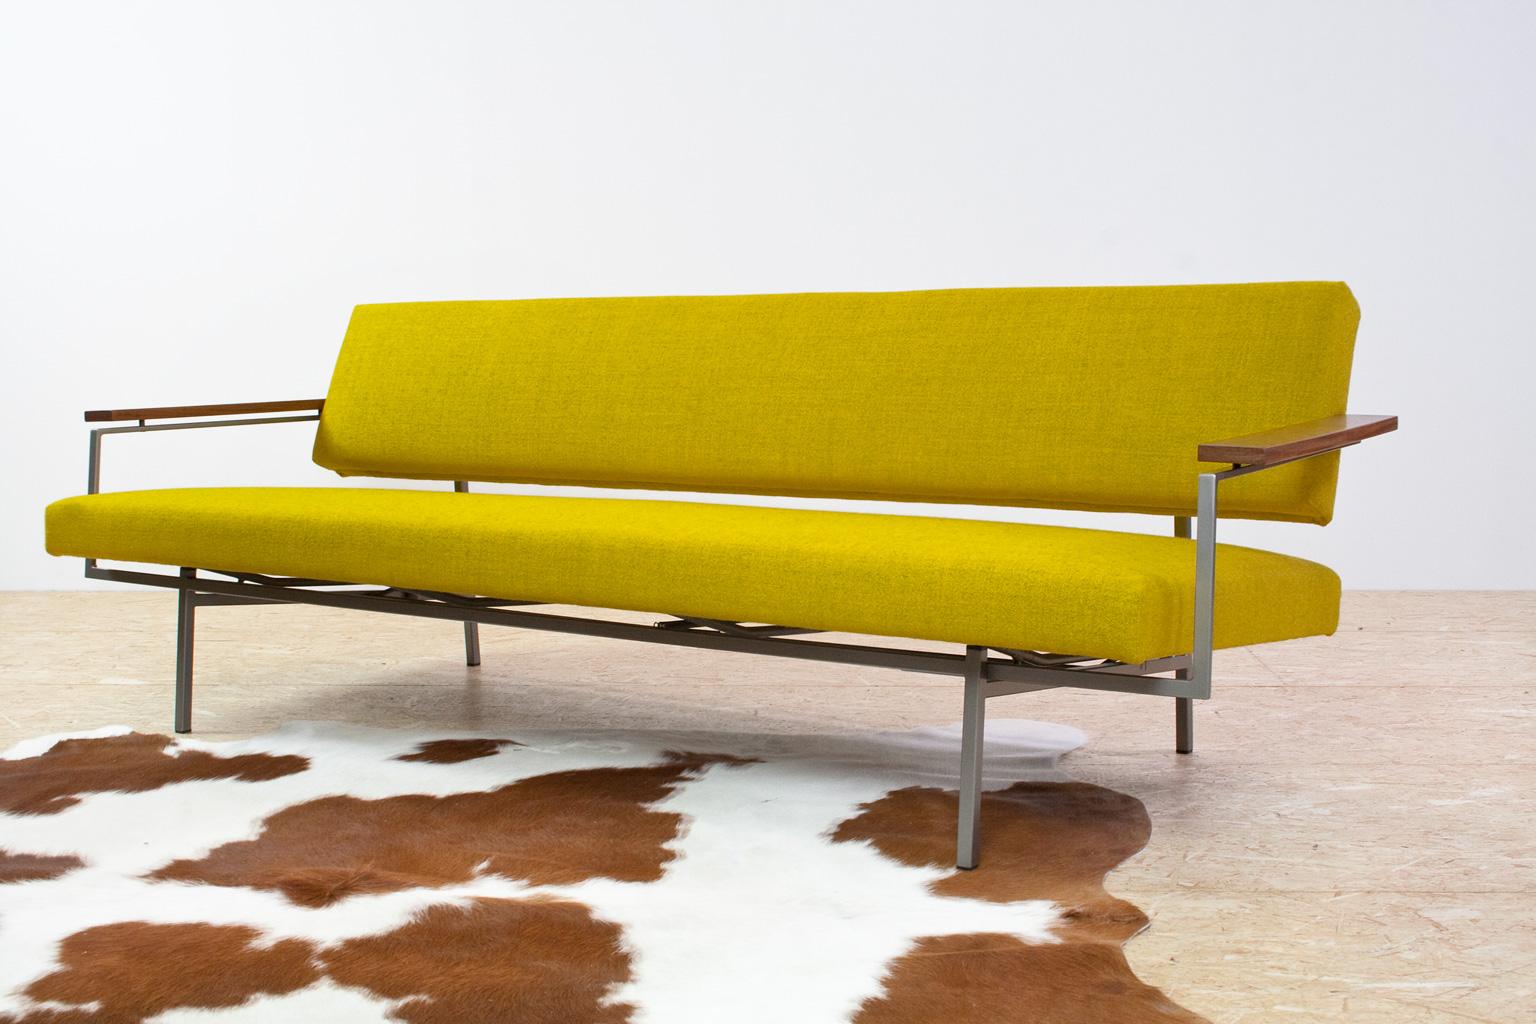 Original Rob Parry Lotus 75 on a grey lacquered metal frame, designed by Rob Parry for the Dutch editor Gelderland in the 1960s. The 3-seat sofa is new upholstered in a yellow (no.66) Ploegwool - De Ploeg, furniture fabric. The seat can be pulled